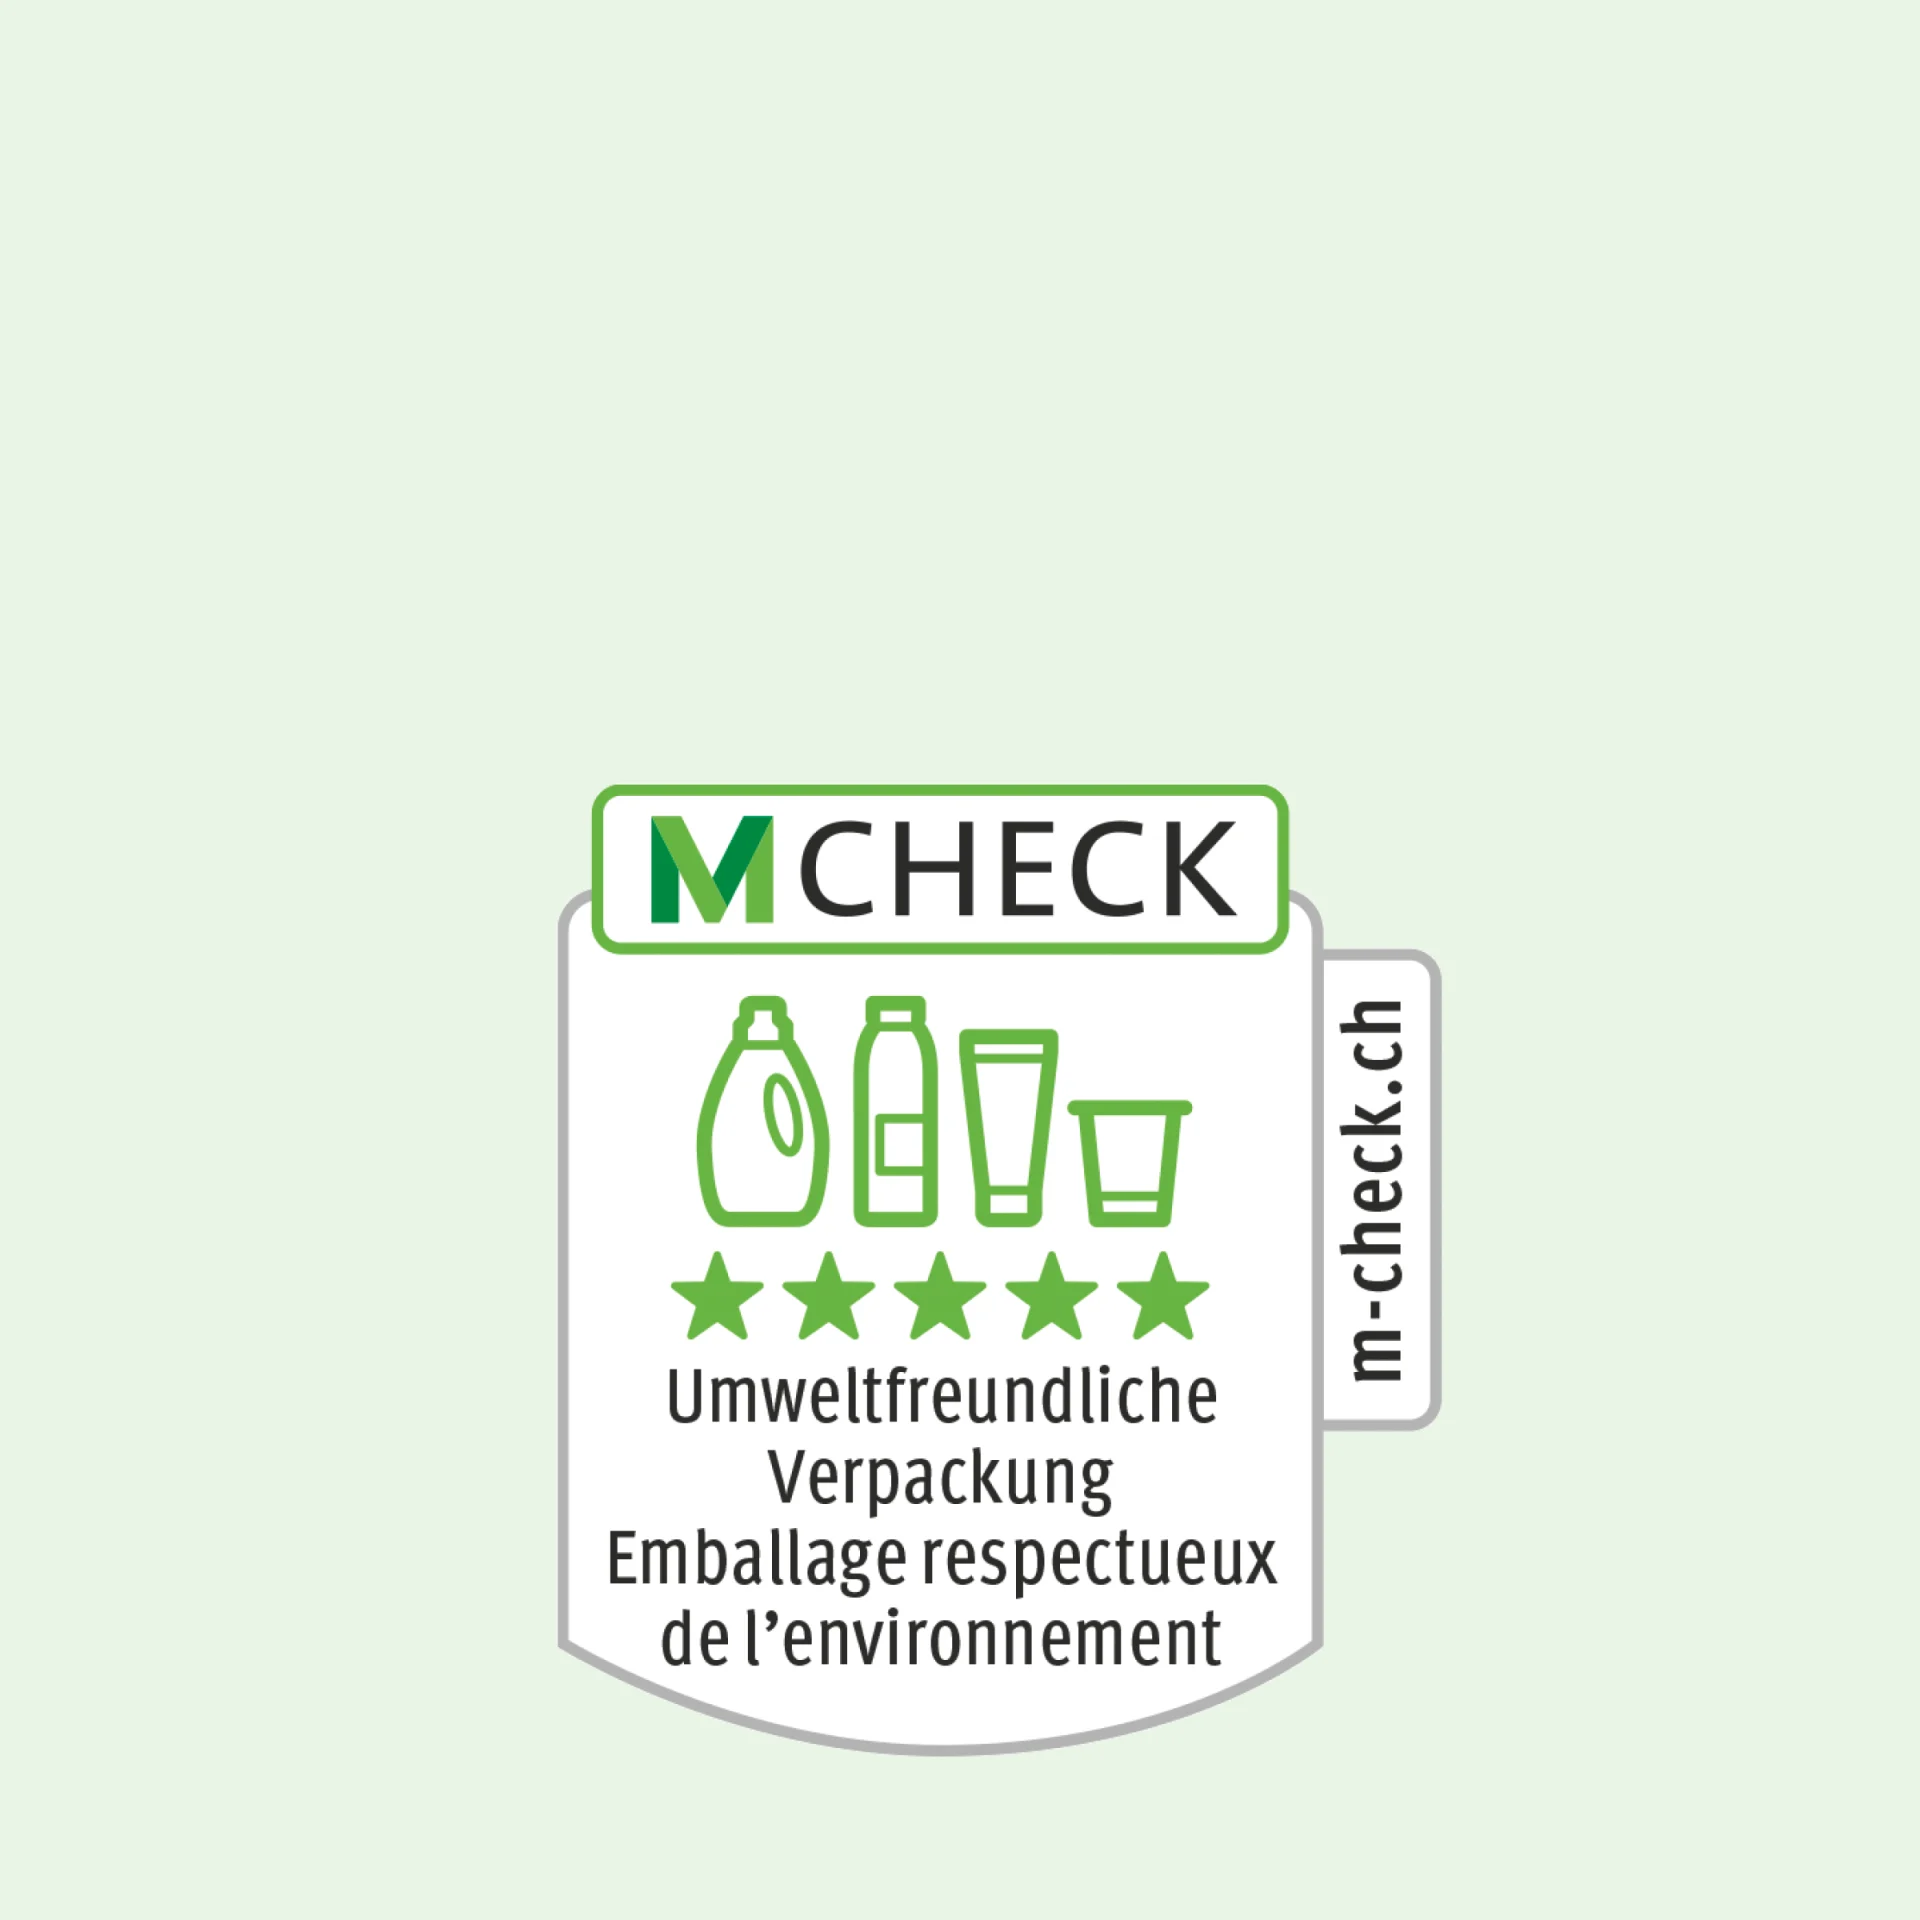 M-Check icon with packaging and, below this, five stars for environmentally friendly packaging.